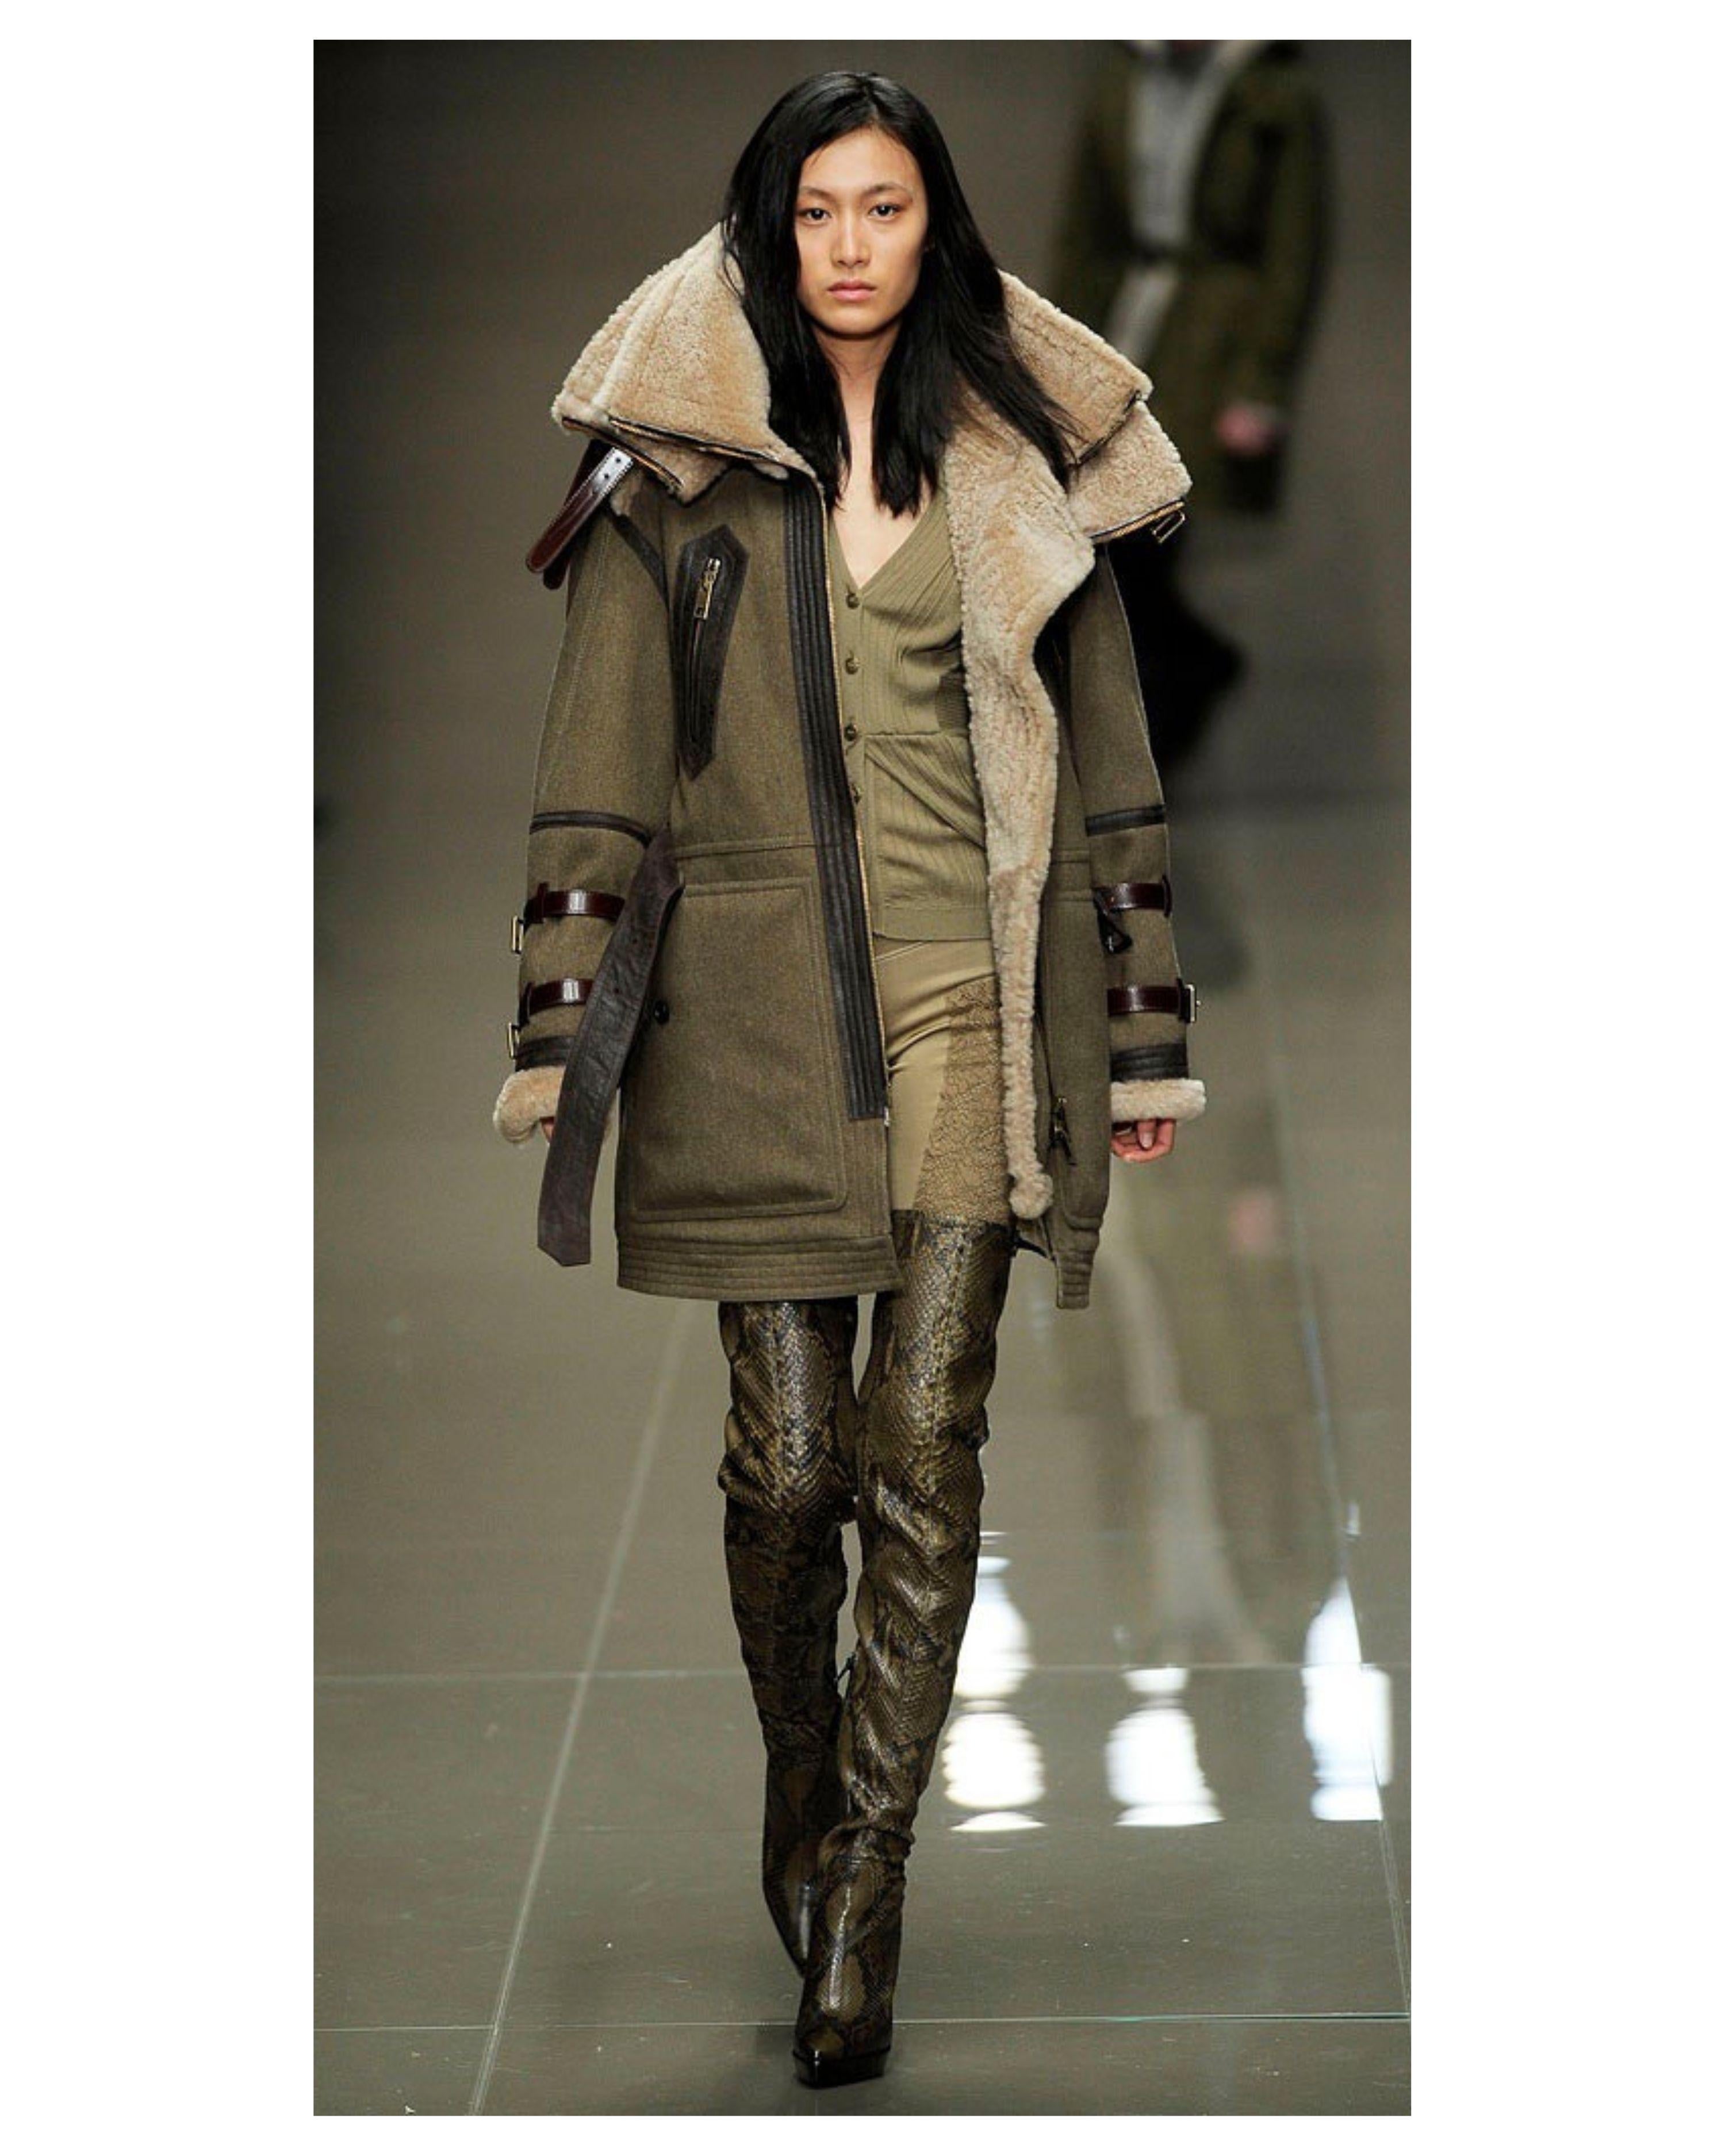 Incredible rare Burberry Prorsum shearling coat by celebrated creative director Christopher Bailey. This military style coat is is from Burberry’s Fall Winter 2010 runway collection and was featured in the Fall Winter 2010 campaign.

Inspired by